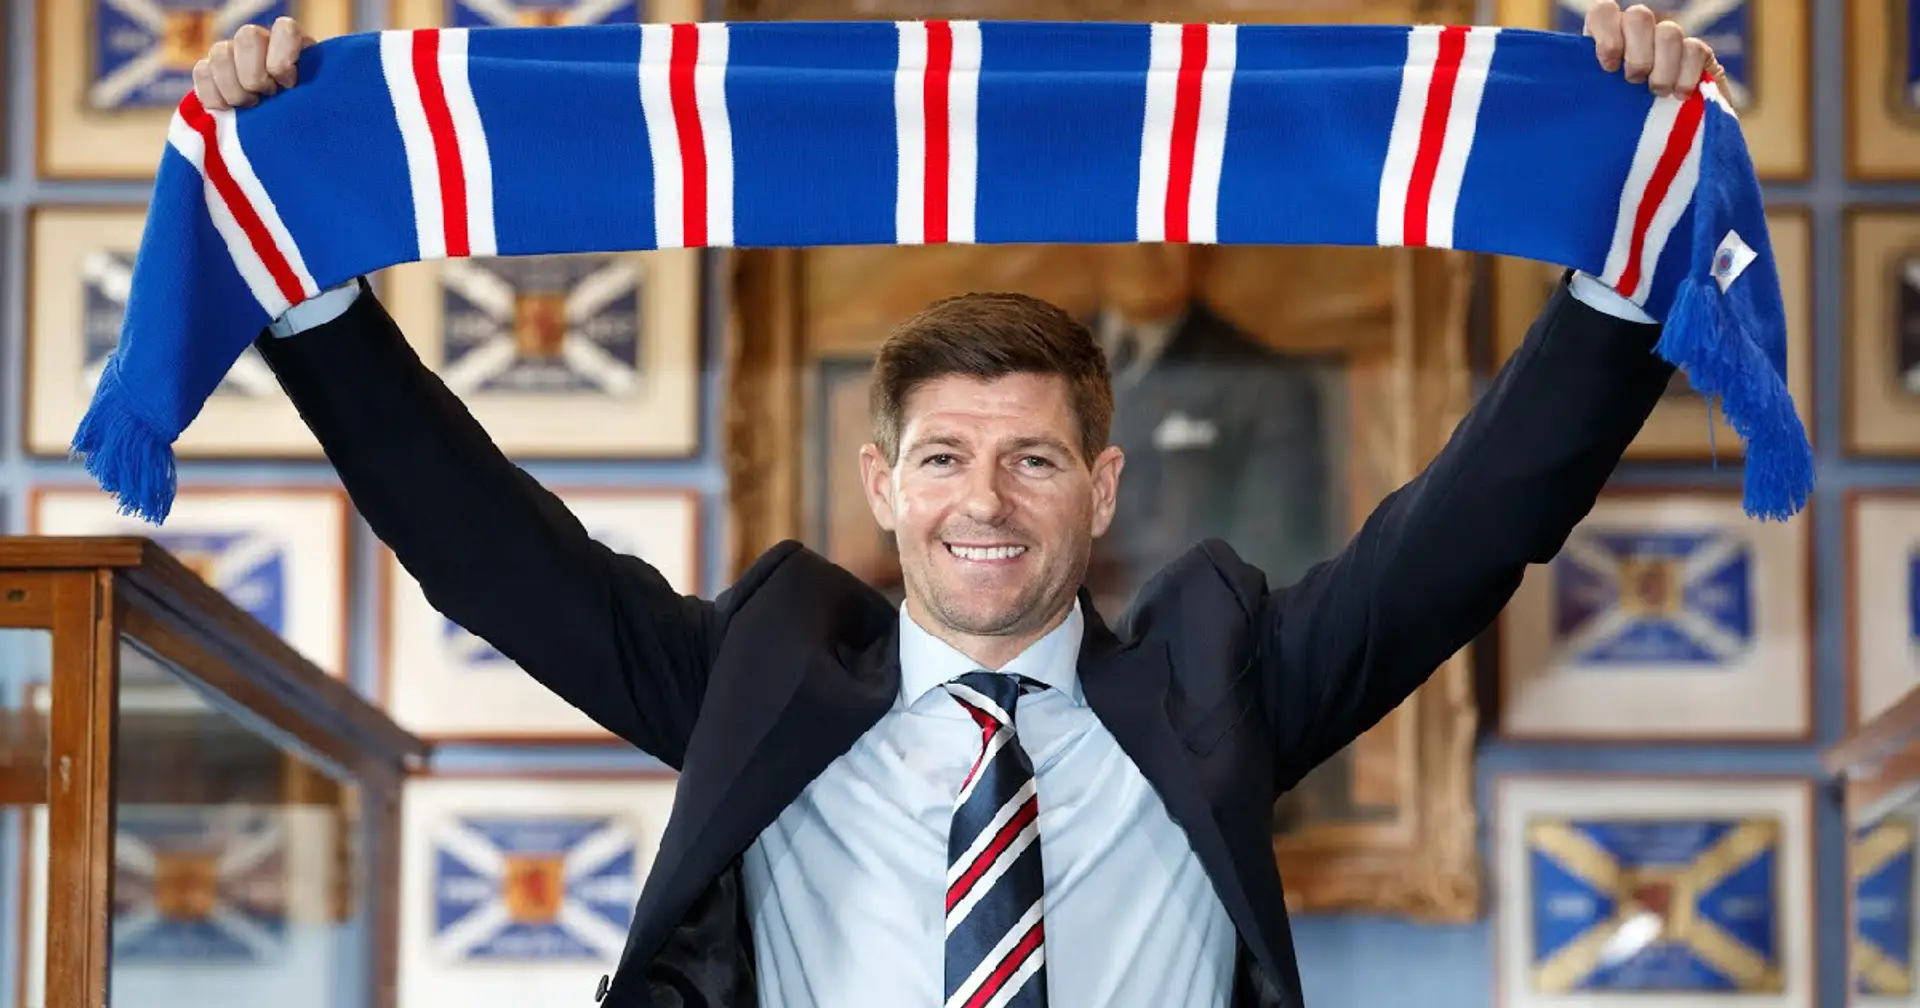 Steven Gerrard, Rangers staff, and players volunteer to defer their wages during coronavirus pandemic